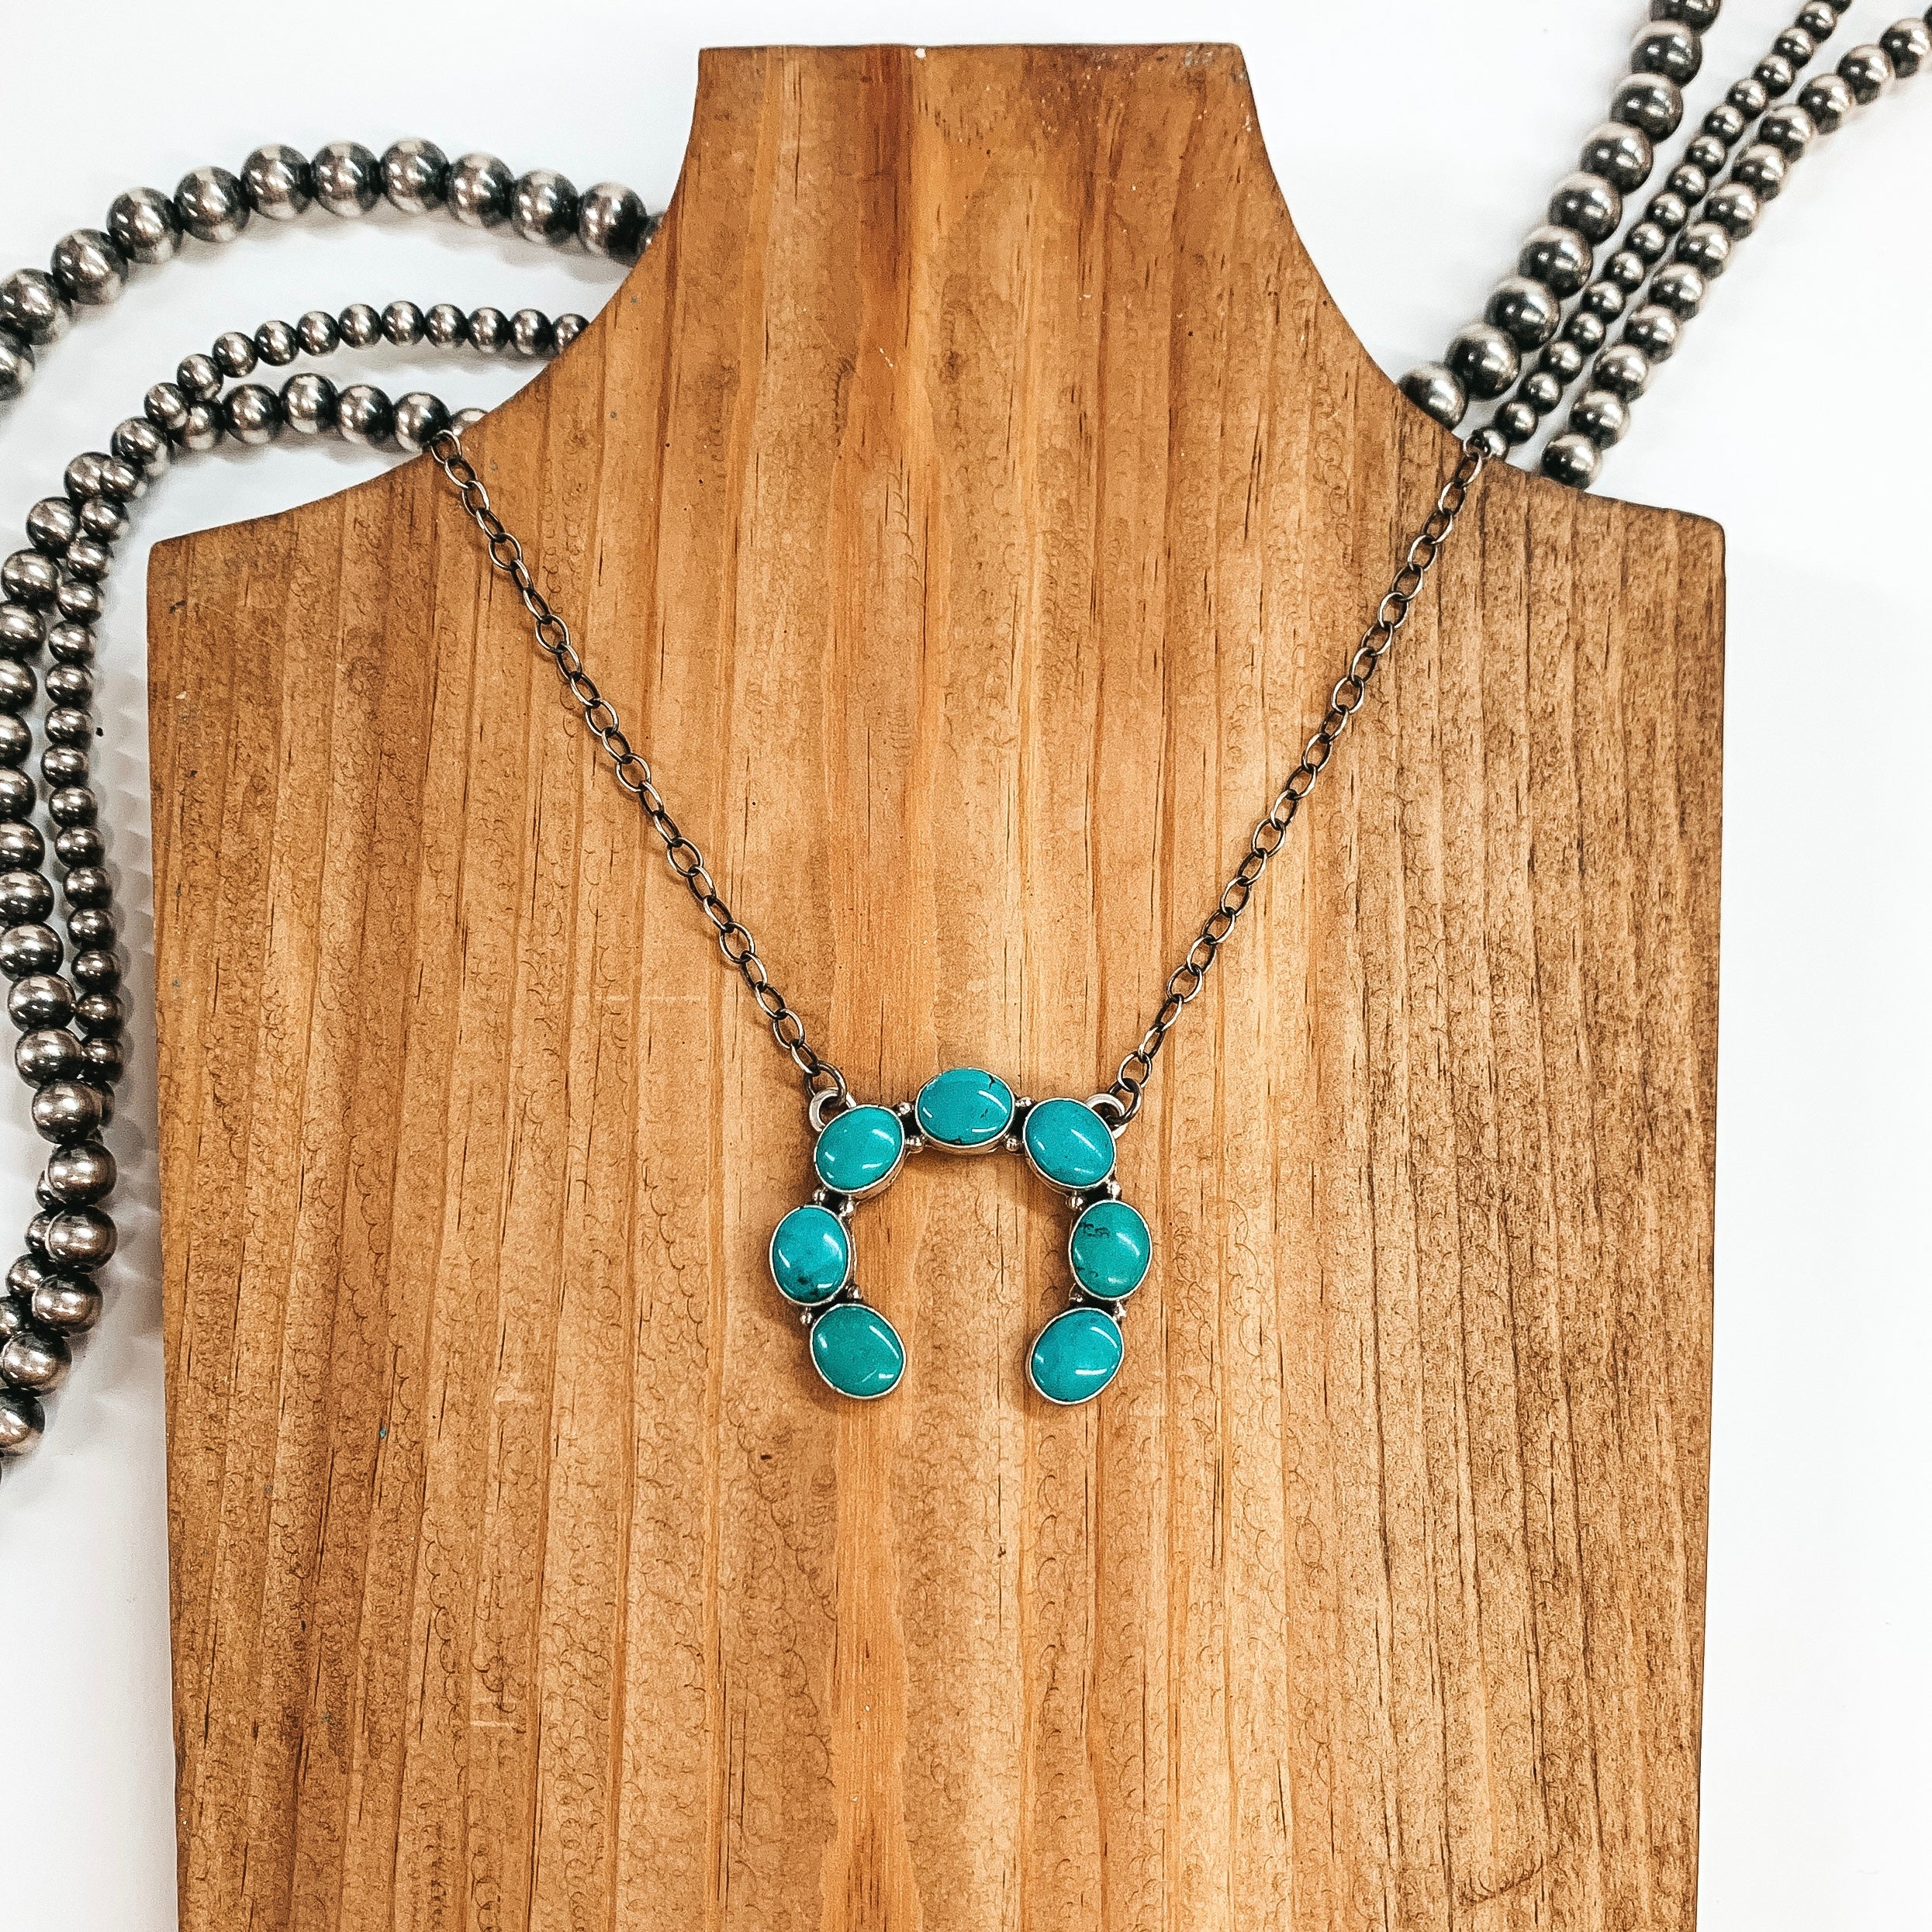 P Yazzie | Navajo Handmade Sterling Silver Chain Necklace with Naja Pendant with Turquoise Stone - Giddy Up Glamour Boutique